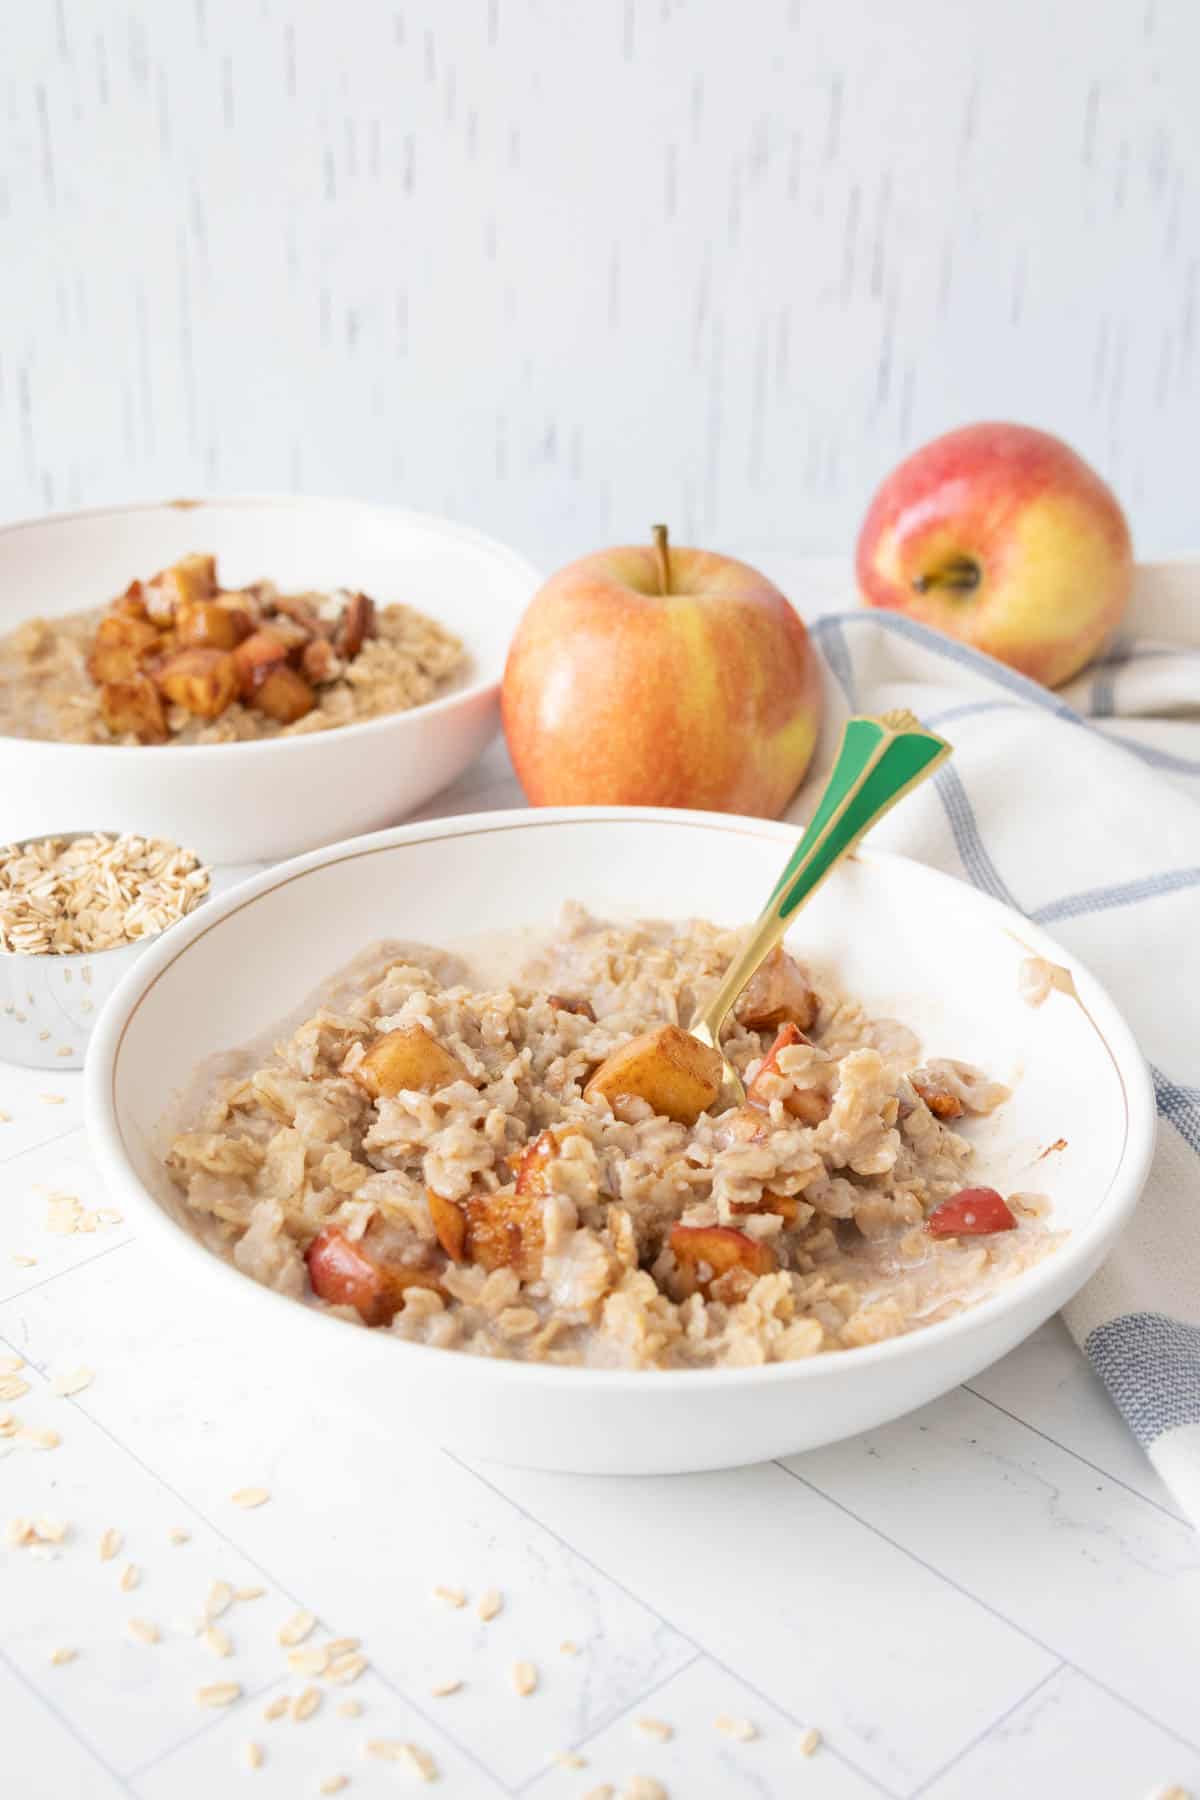 Two bowls of oatmeal with apples and oats on a table.